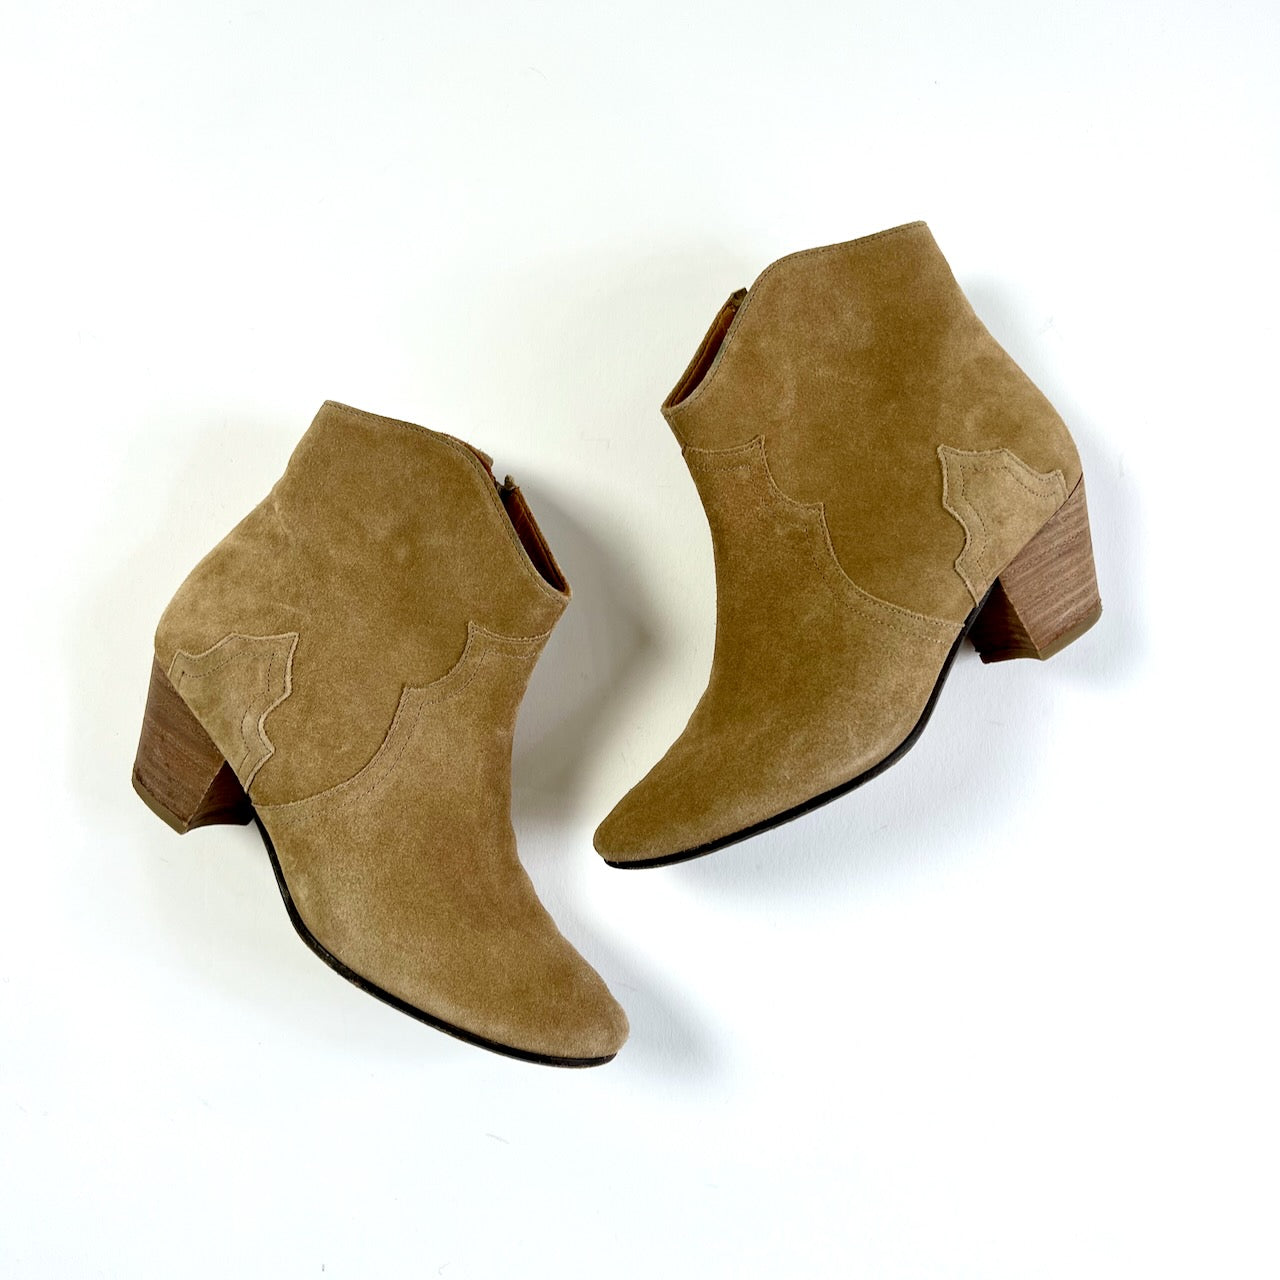 Isabel Marant Etoile 'Dicker' suede ankle boots on Manifesto Woman